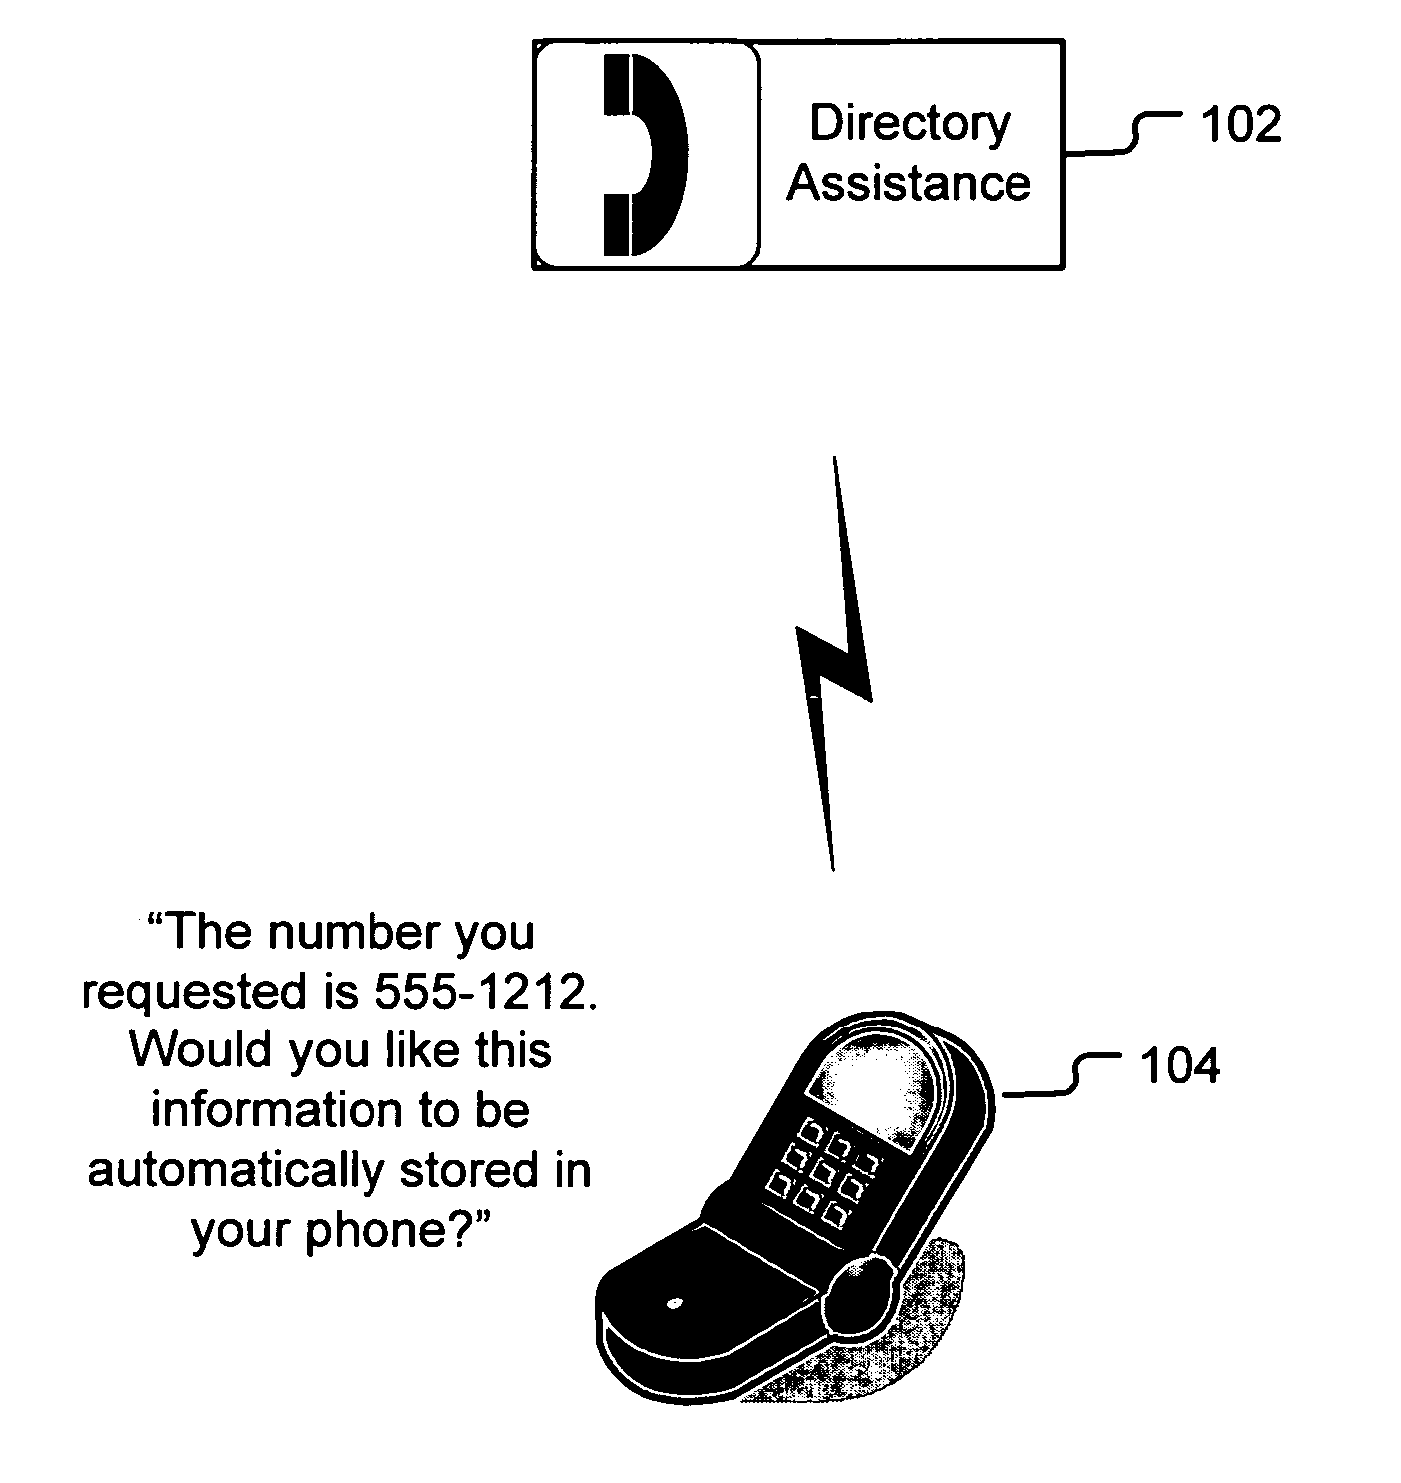 Automatic storage of contact information on a cellular phone